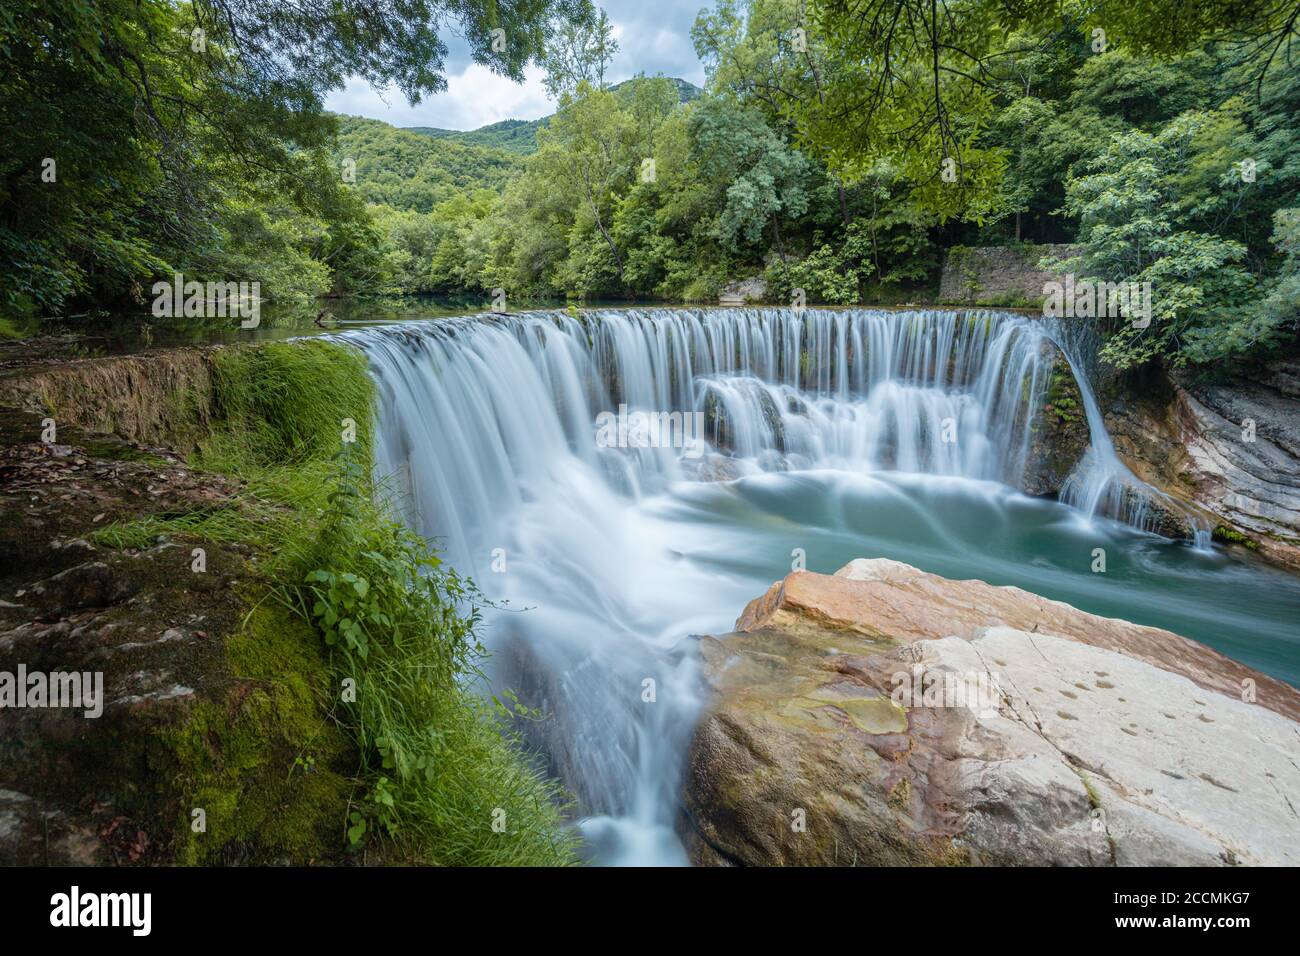 Early June at the Cascade de Saint Laurent Le Minier, waters flows over the modified water fall put in place to control the flow of the River Vis Stock Photo